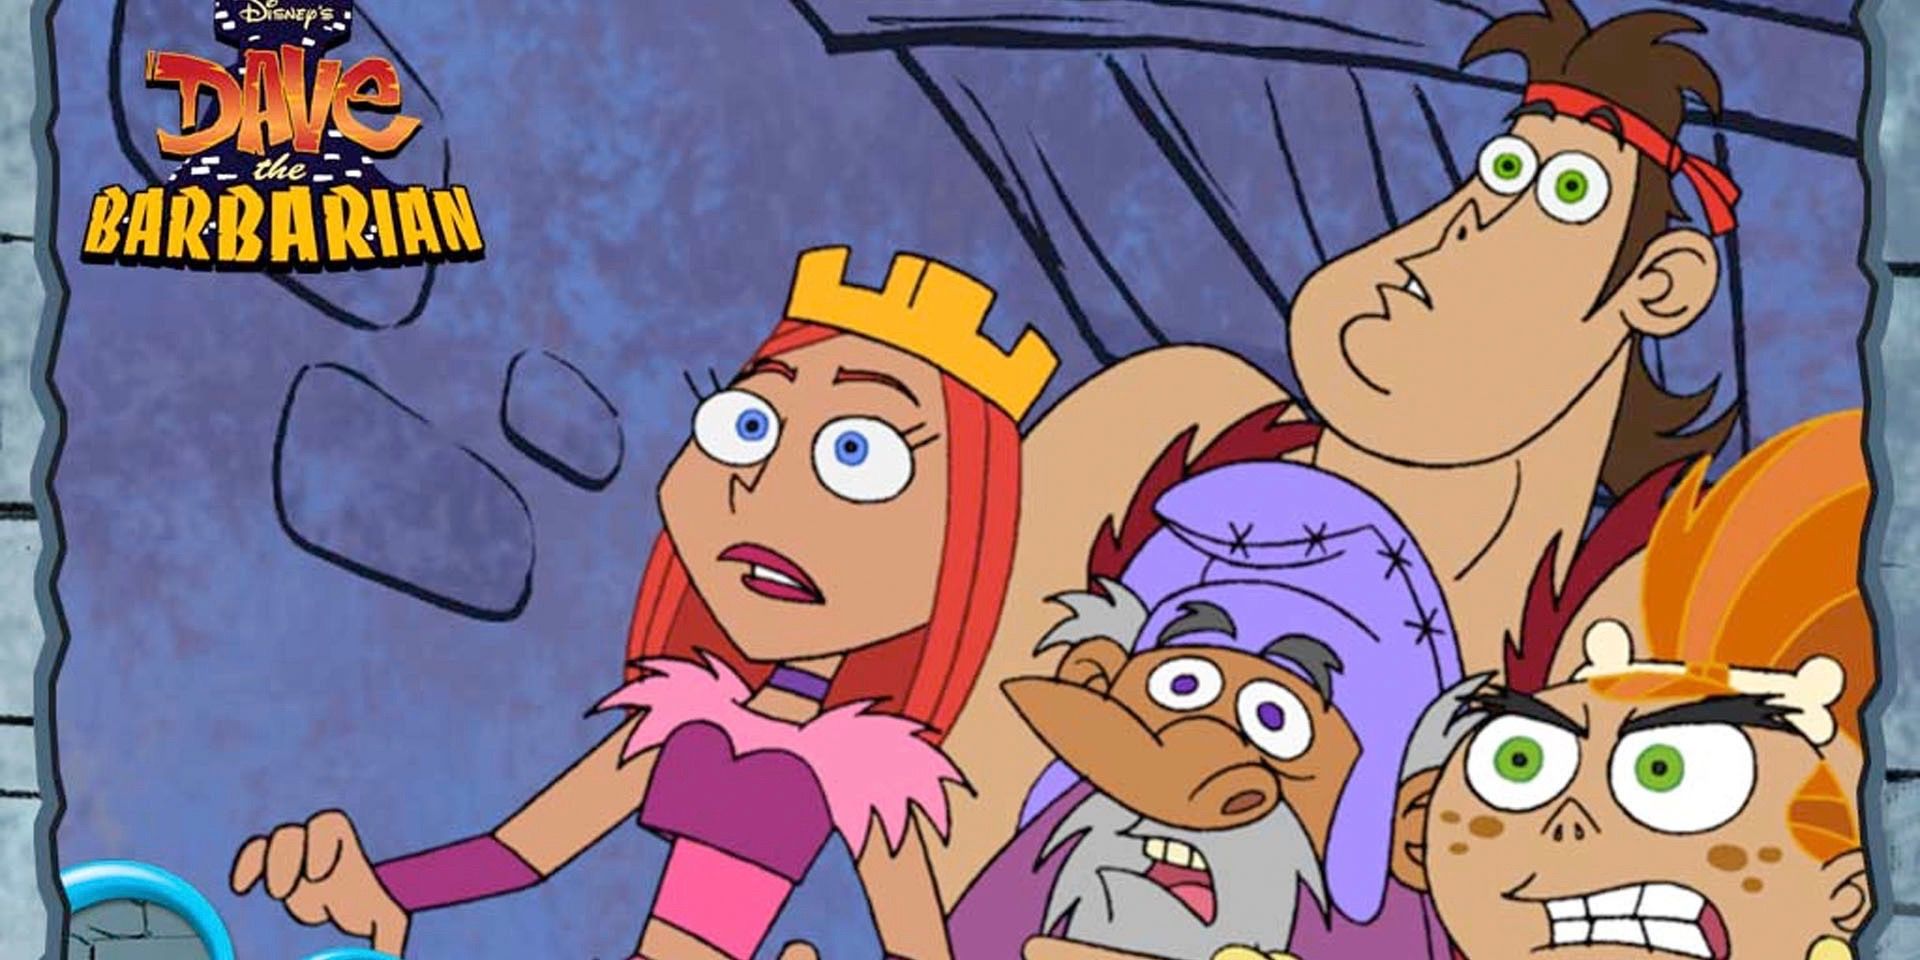 The characters of Dave the Barbarian